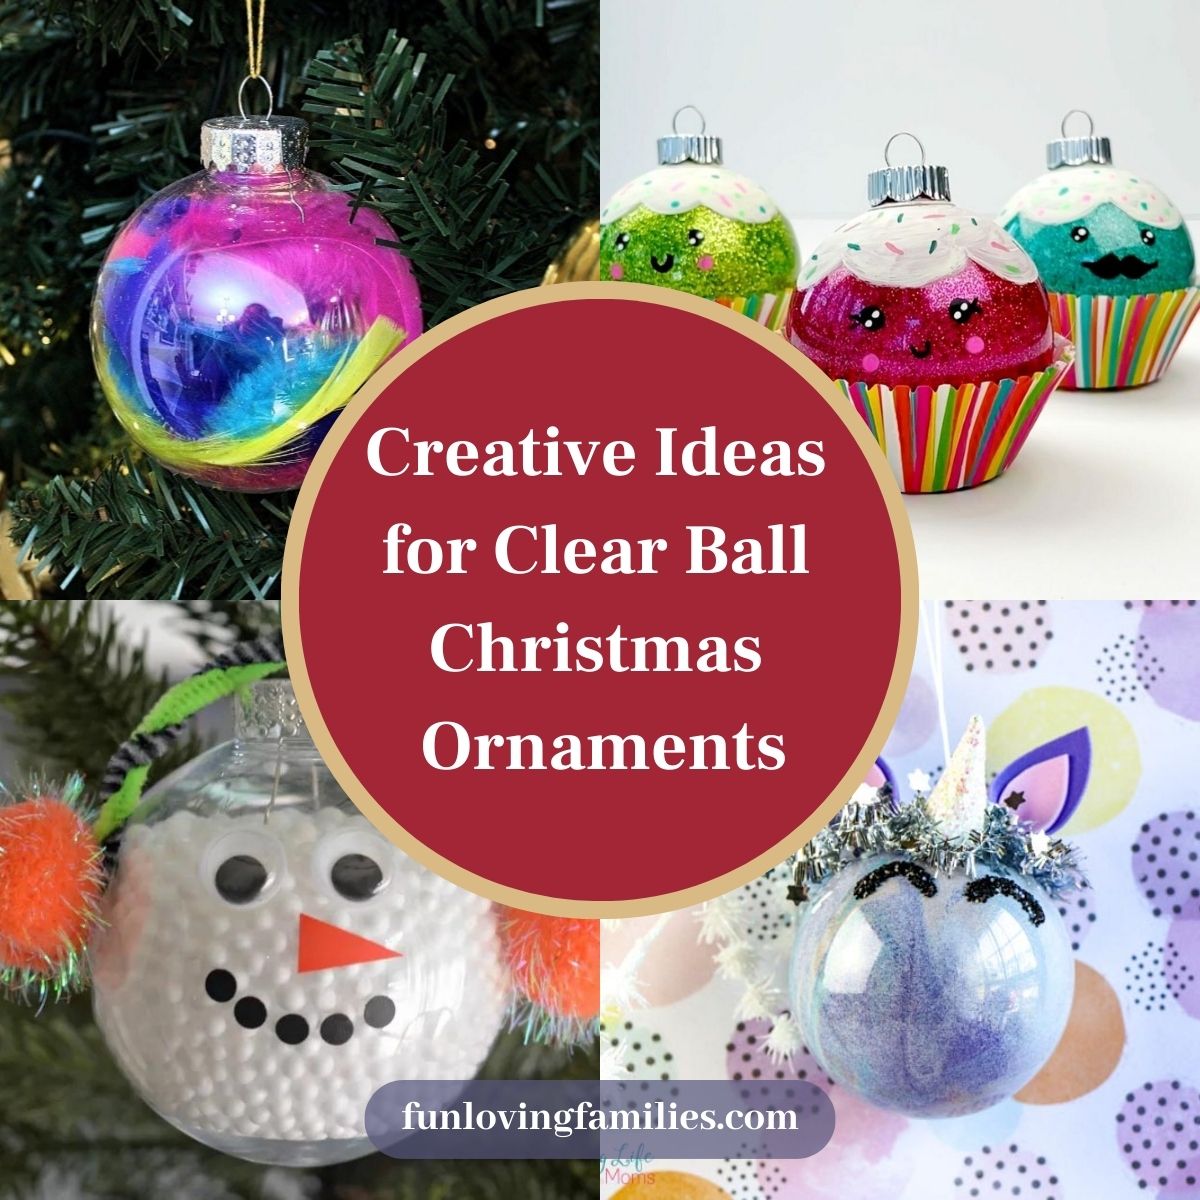 Plastic Ball Ornament Decorating Ideas That Are Fun and Easy